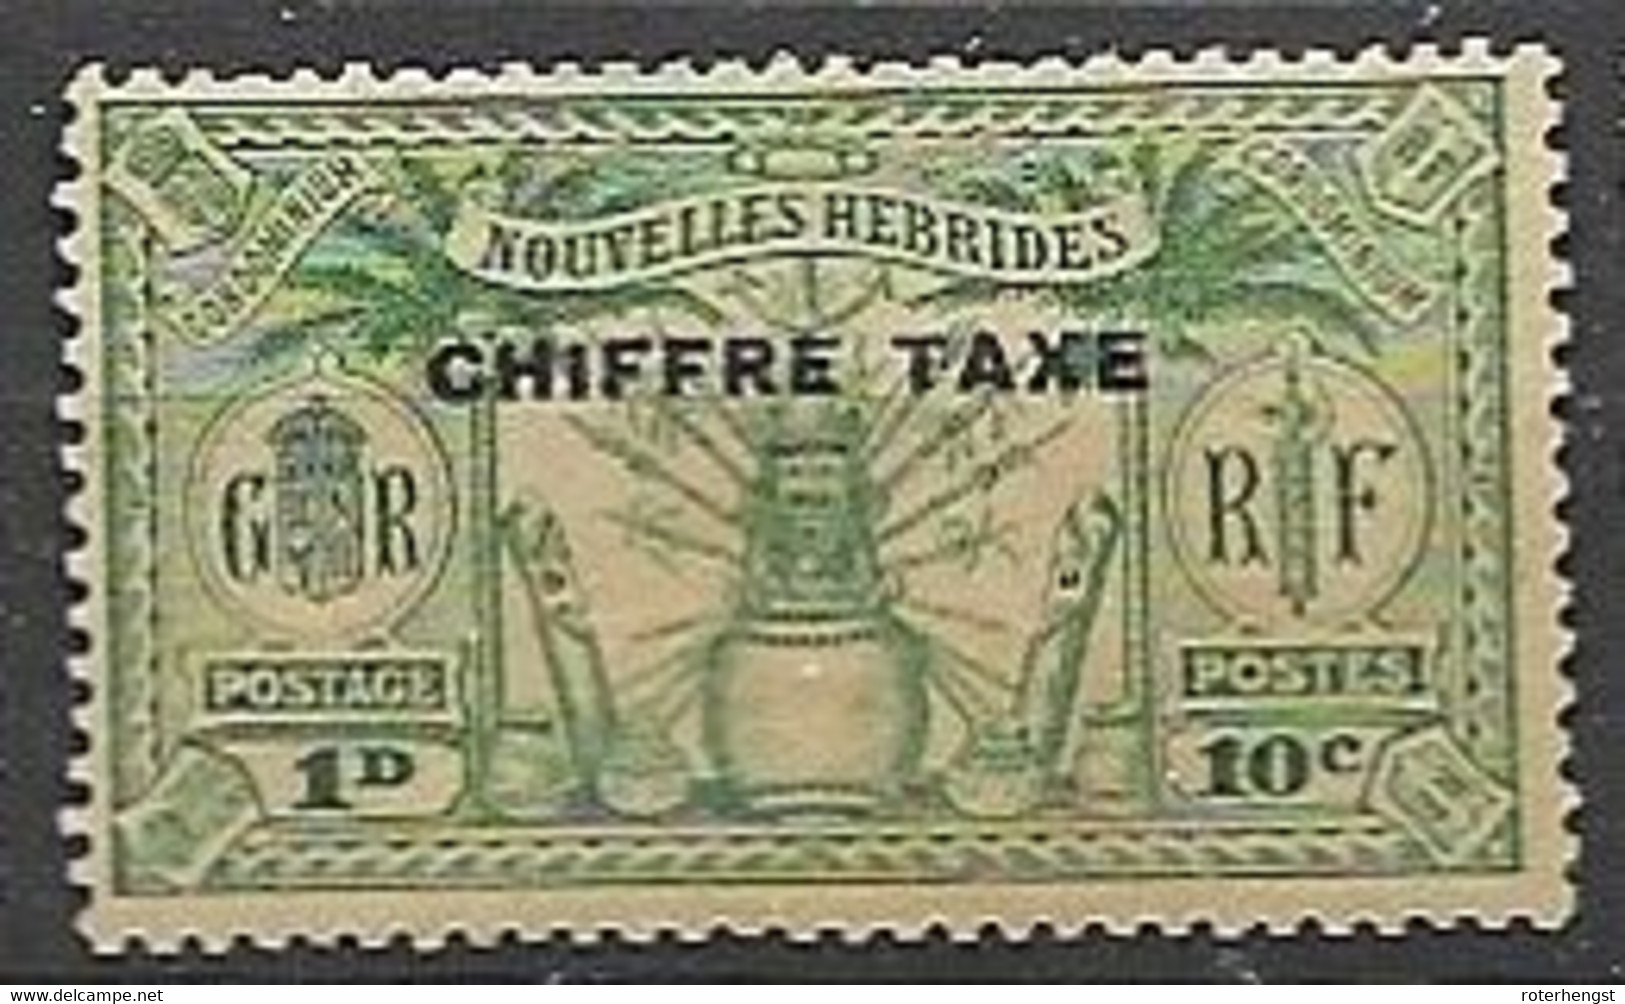 NH Mh * 75 Euros 1925 (stain/dark Gum Toned On 1*1cm) - Postage Due